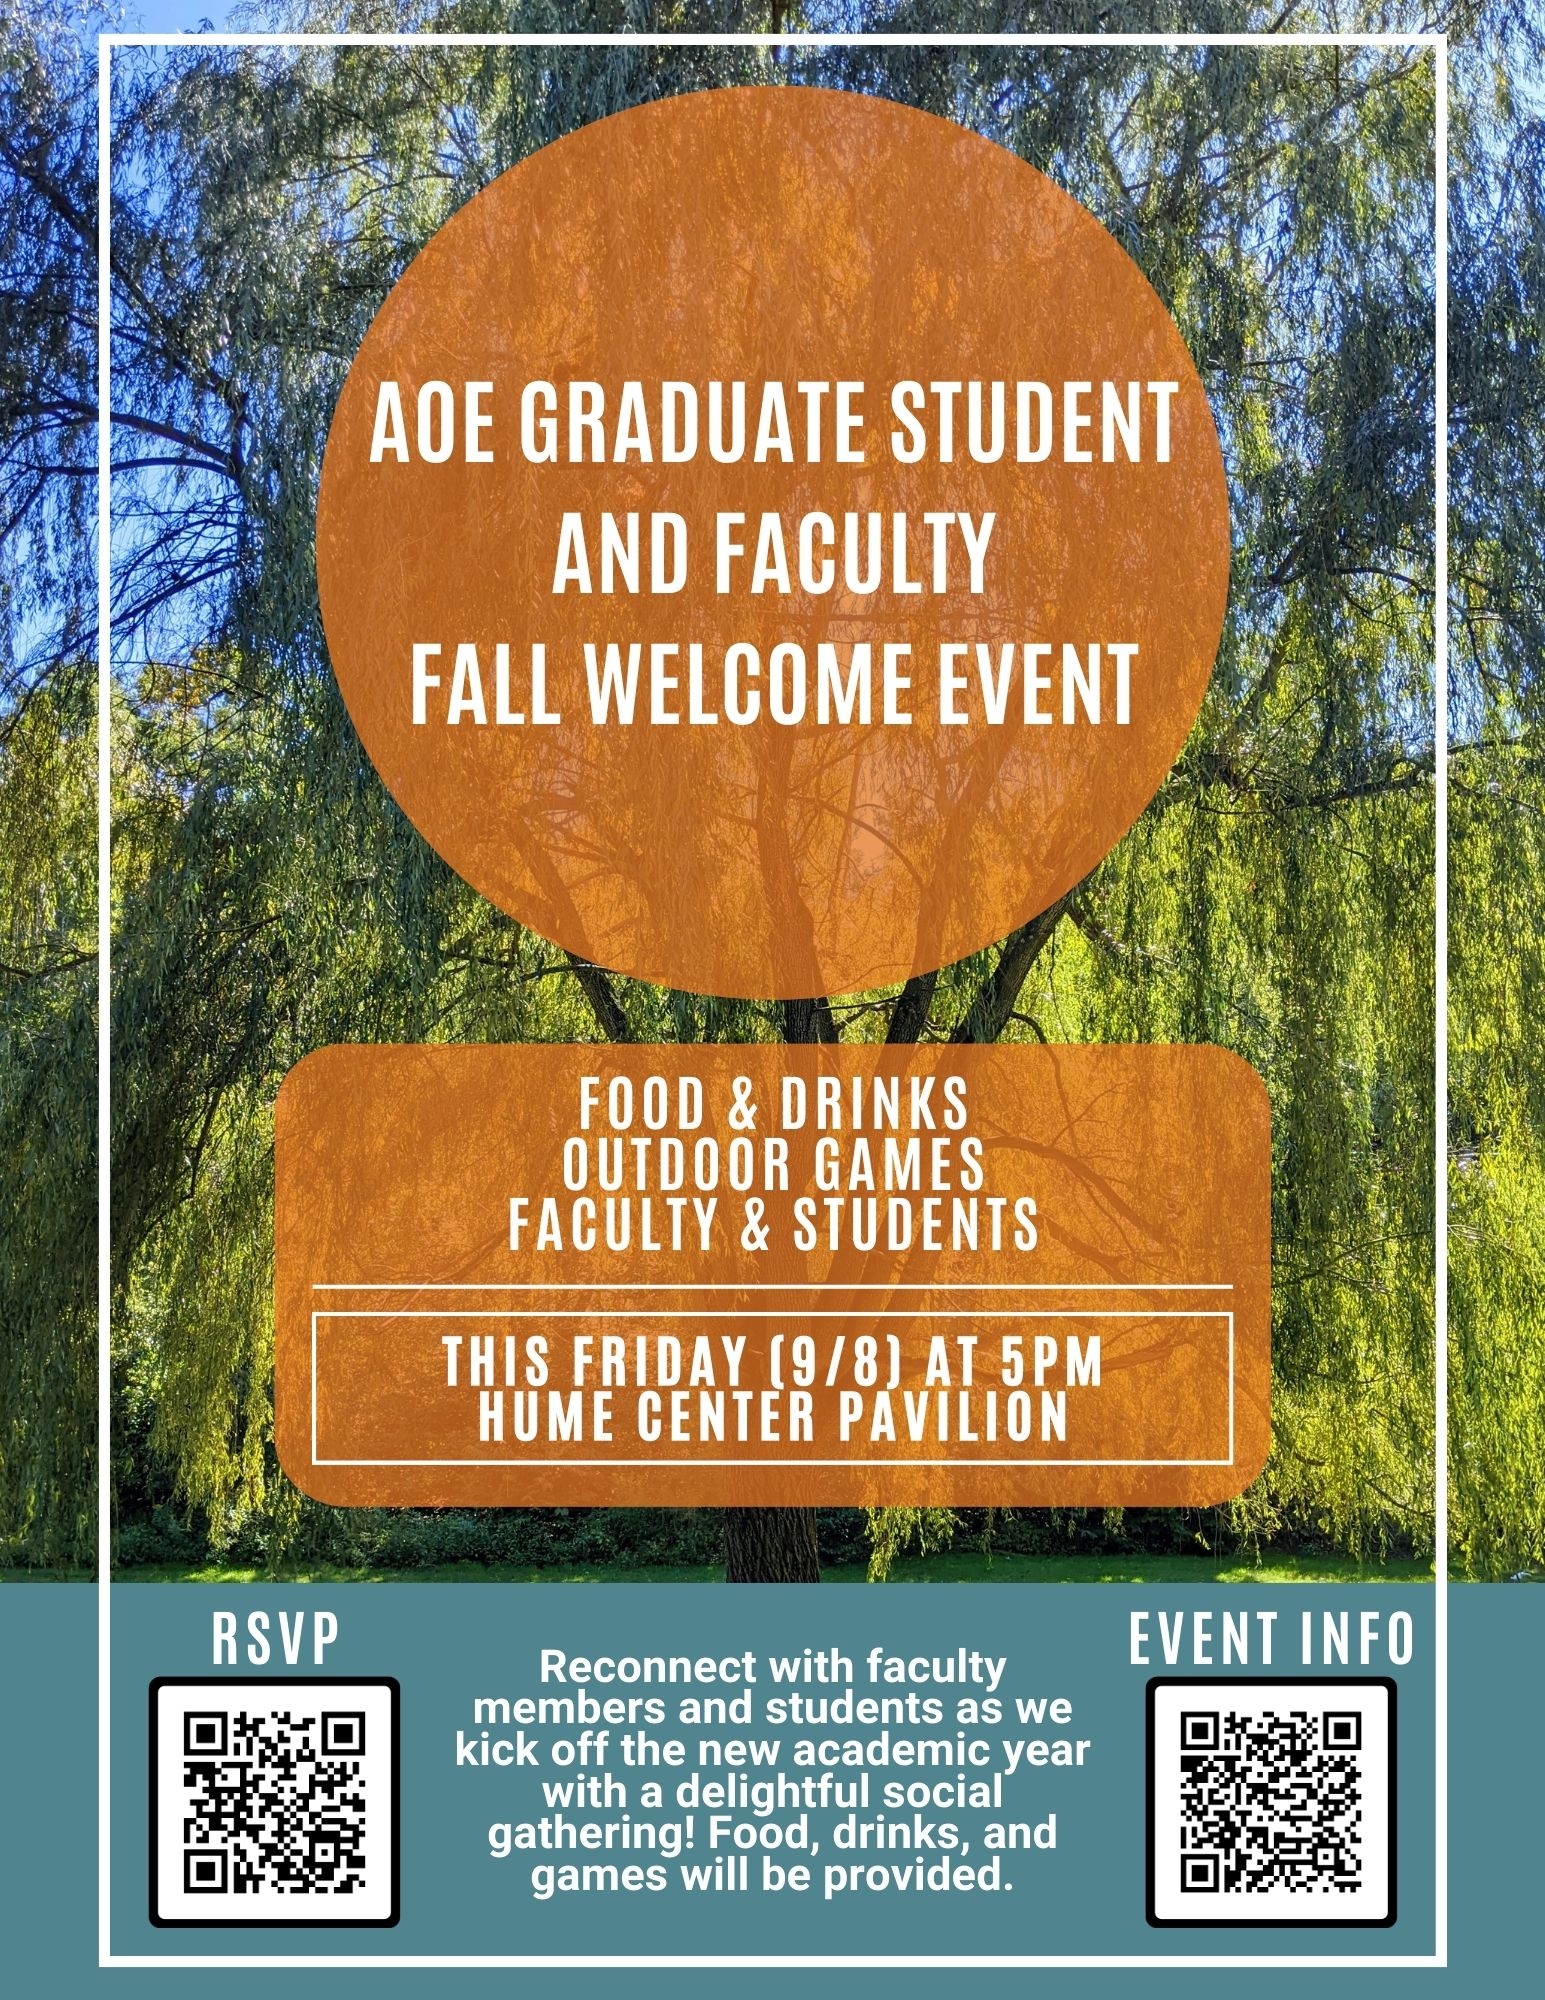 Flyer for the welcome event, containing the information on this webpage